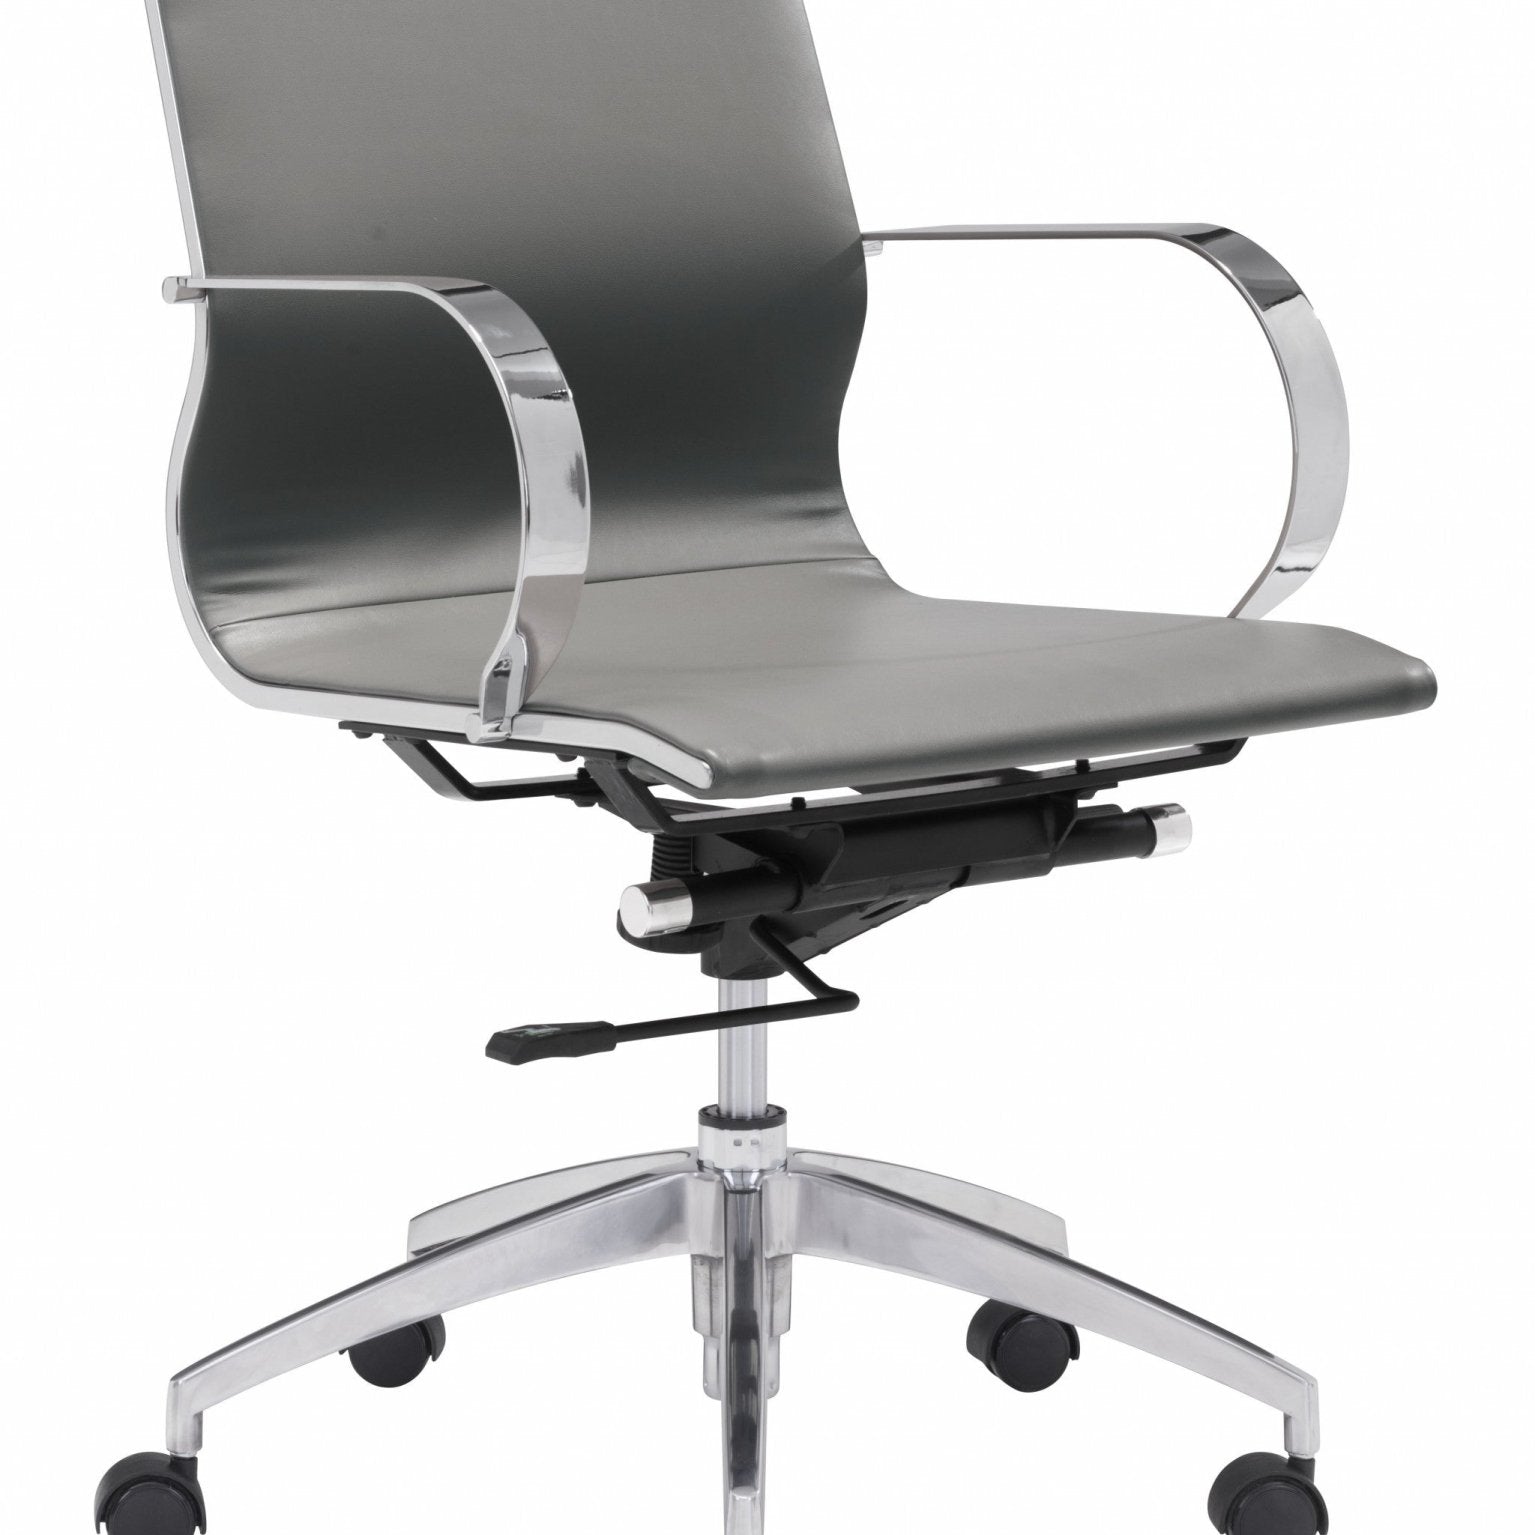 Gray-Faux-Leather-Seat-Swivel-Adjustable-Conference-Chair-Metal-Back-Steel-Frame-Office-Chairs